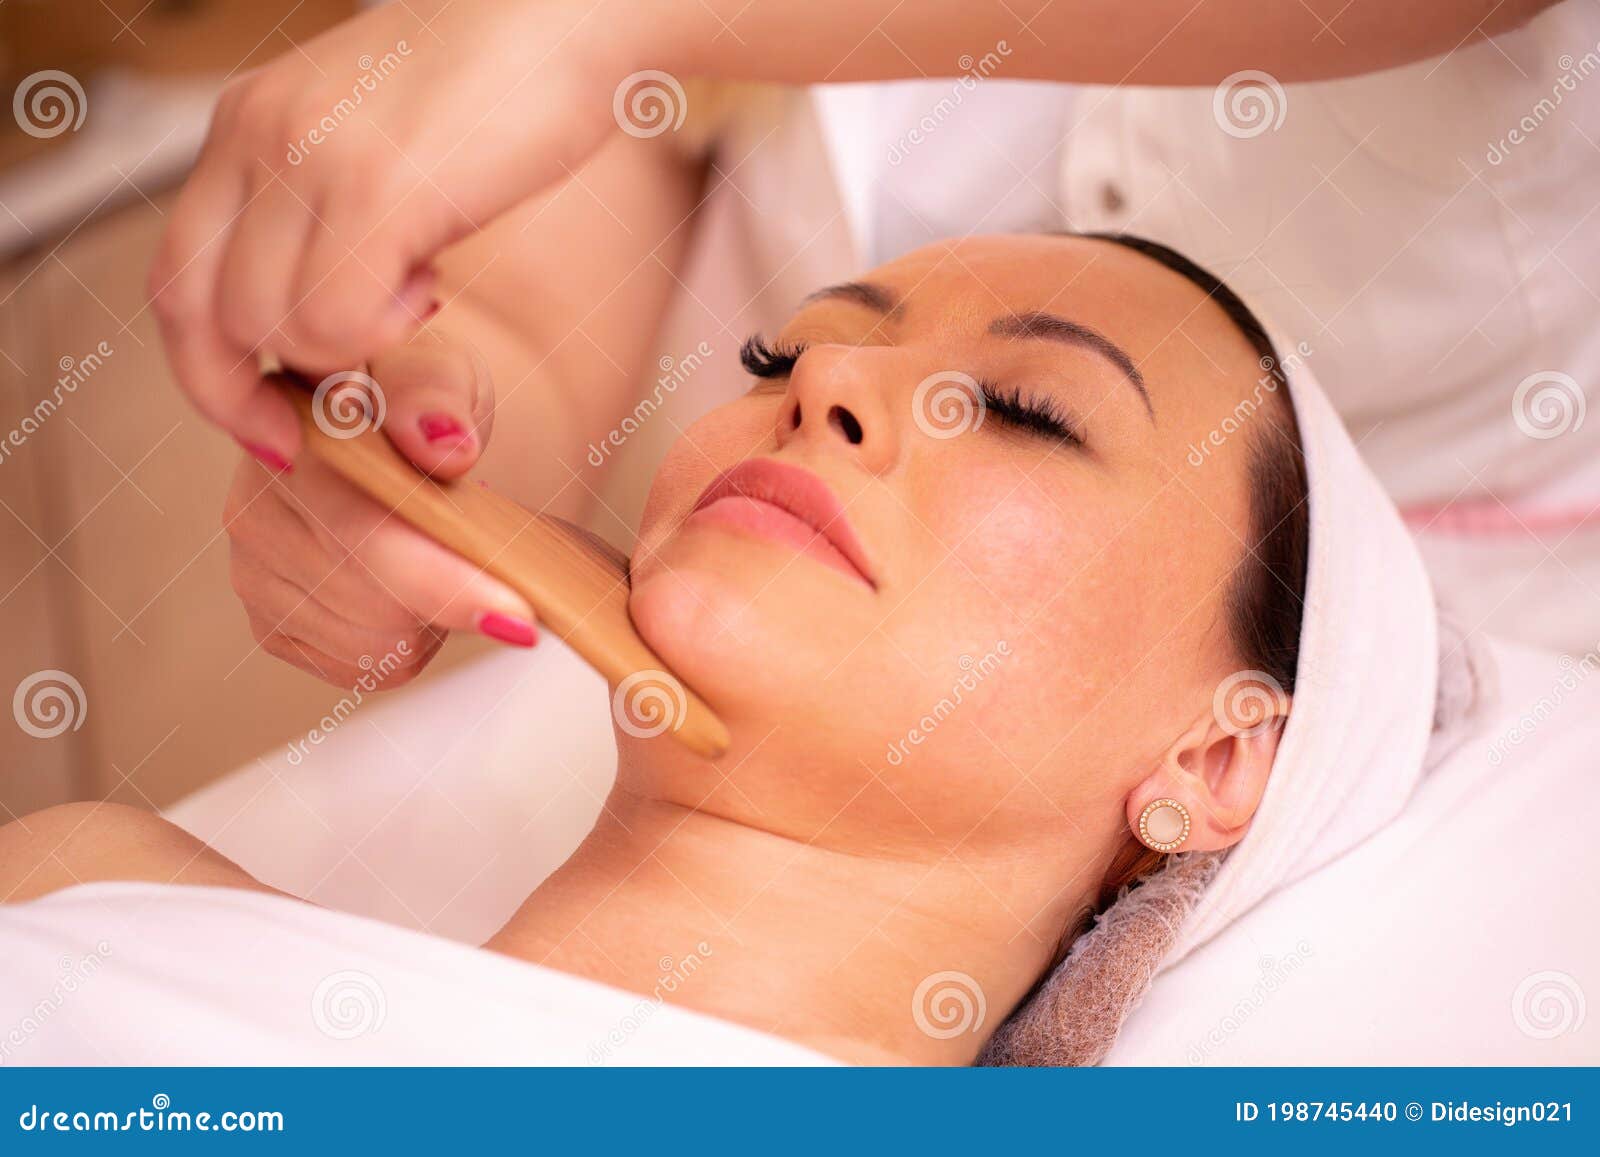 facial madero massage with wooden tools